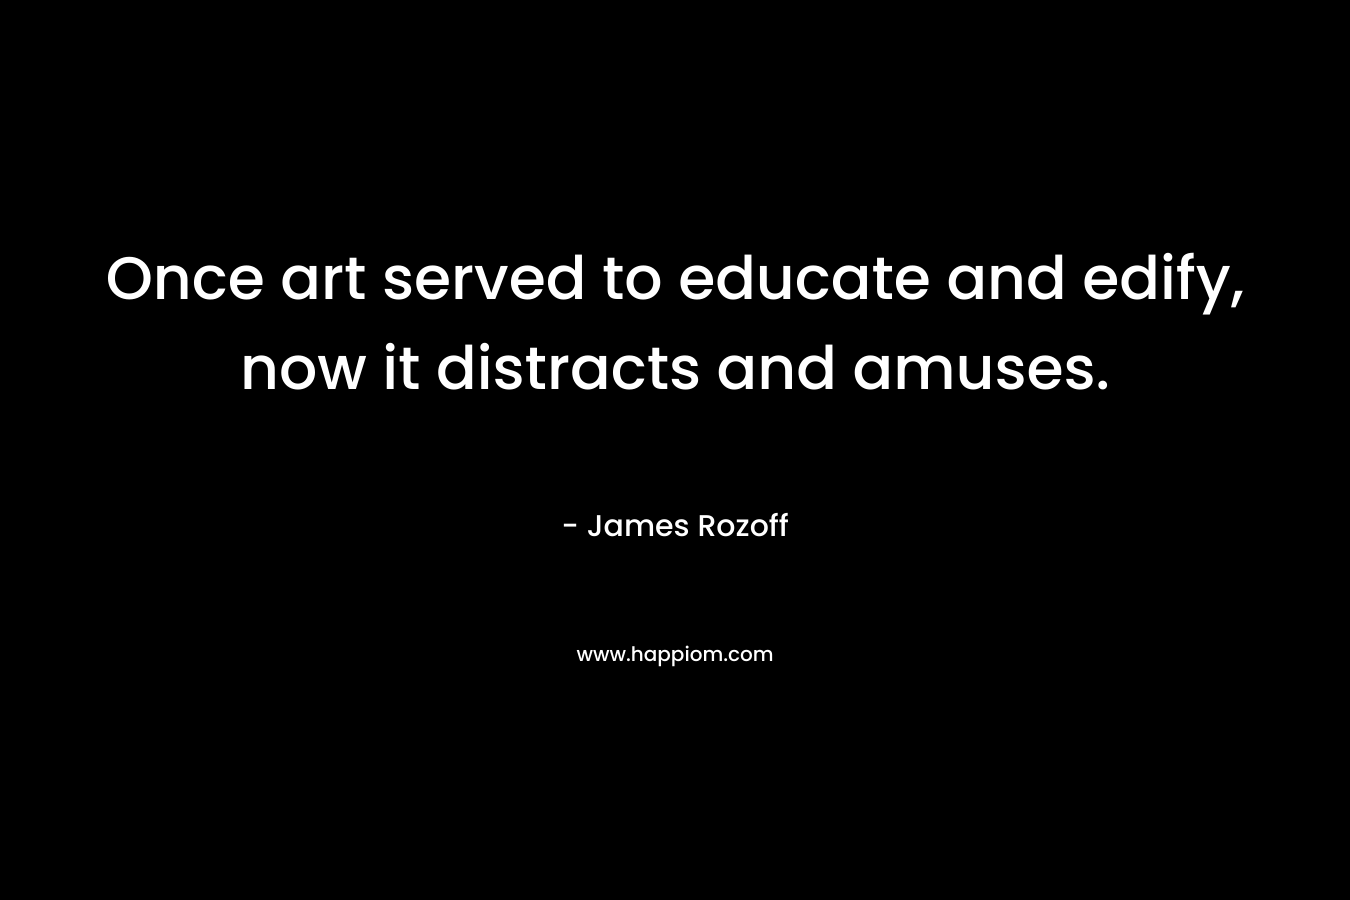 Once art served to educate and edify, now it distracts and amuses.